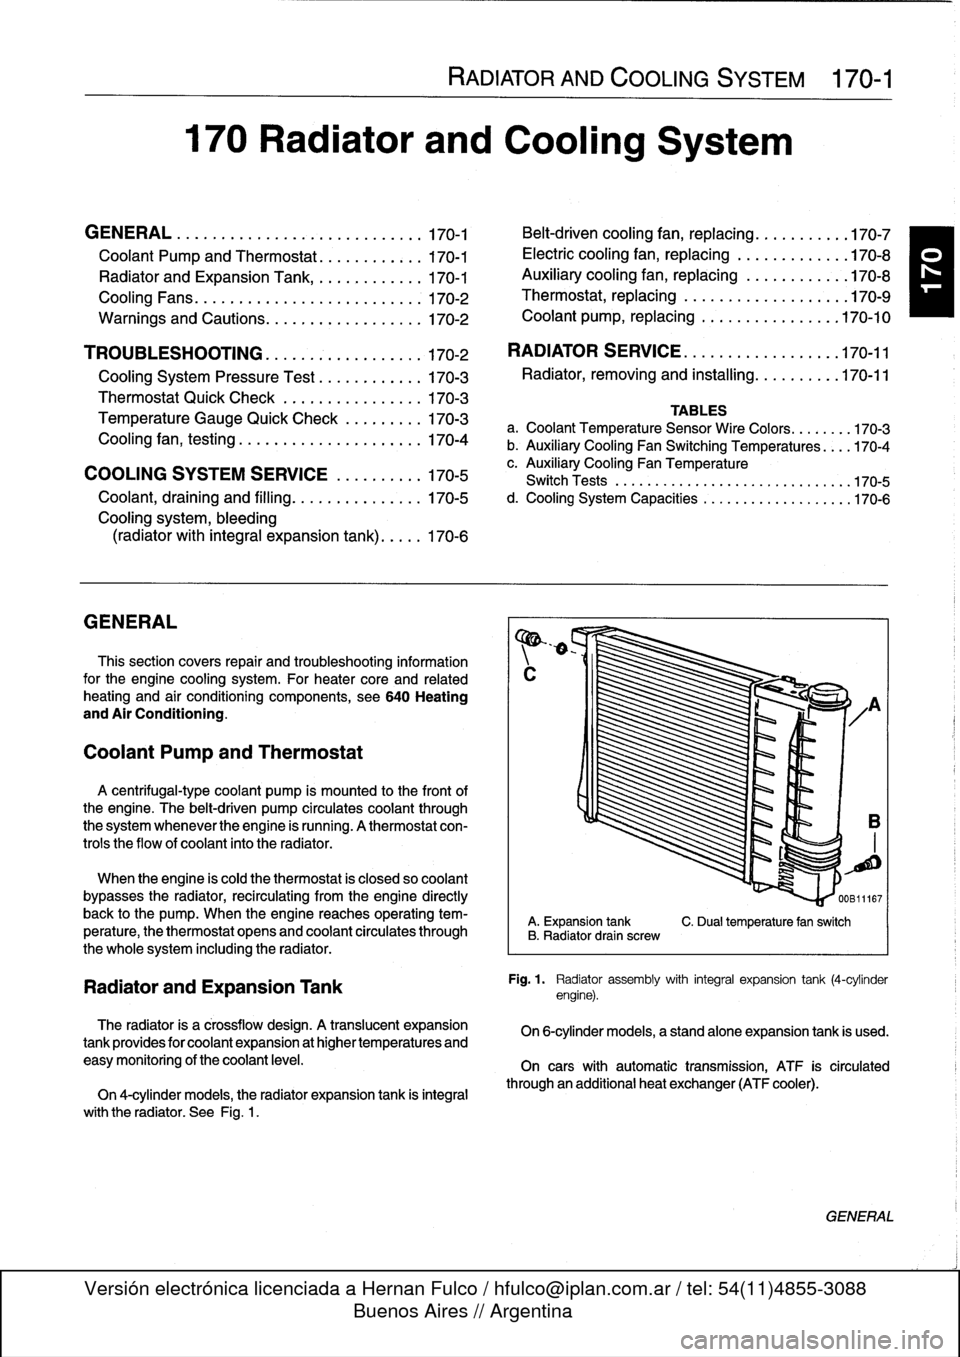 BMW 328i 1997 E36 Workshop Manual 170
Radiator
and
Cooling
System

GENERAL
.
.
.....
.
...
.
.
.
.
.
....
.
.
.
.
.
.
.
.170-1

Coolant
Pump
and
Thermostat
........
.
.
.
.
170-1

Radiator
and
Expansion
Tank
.........
.
...
170-1

Coo